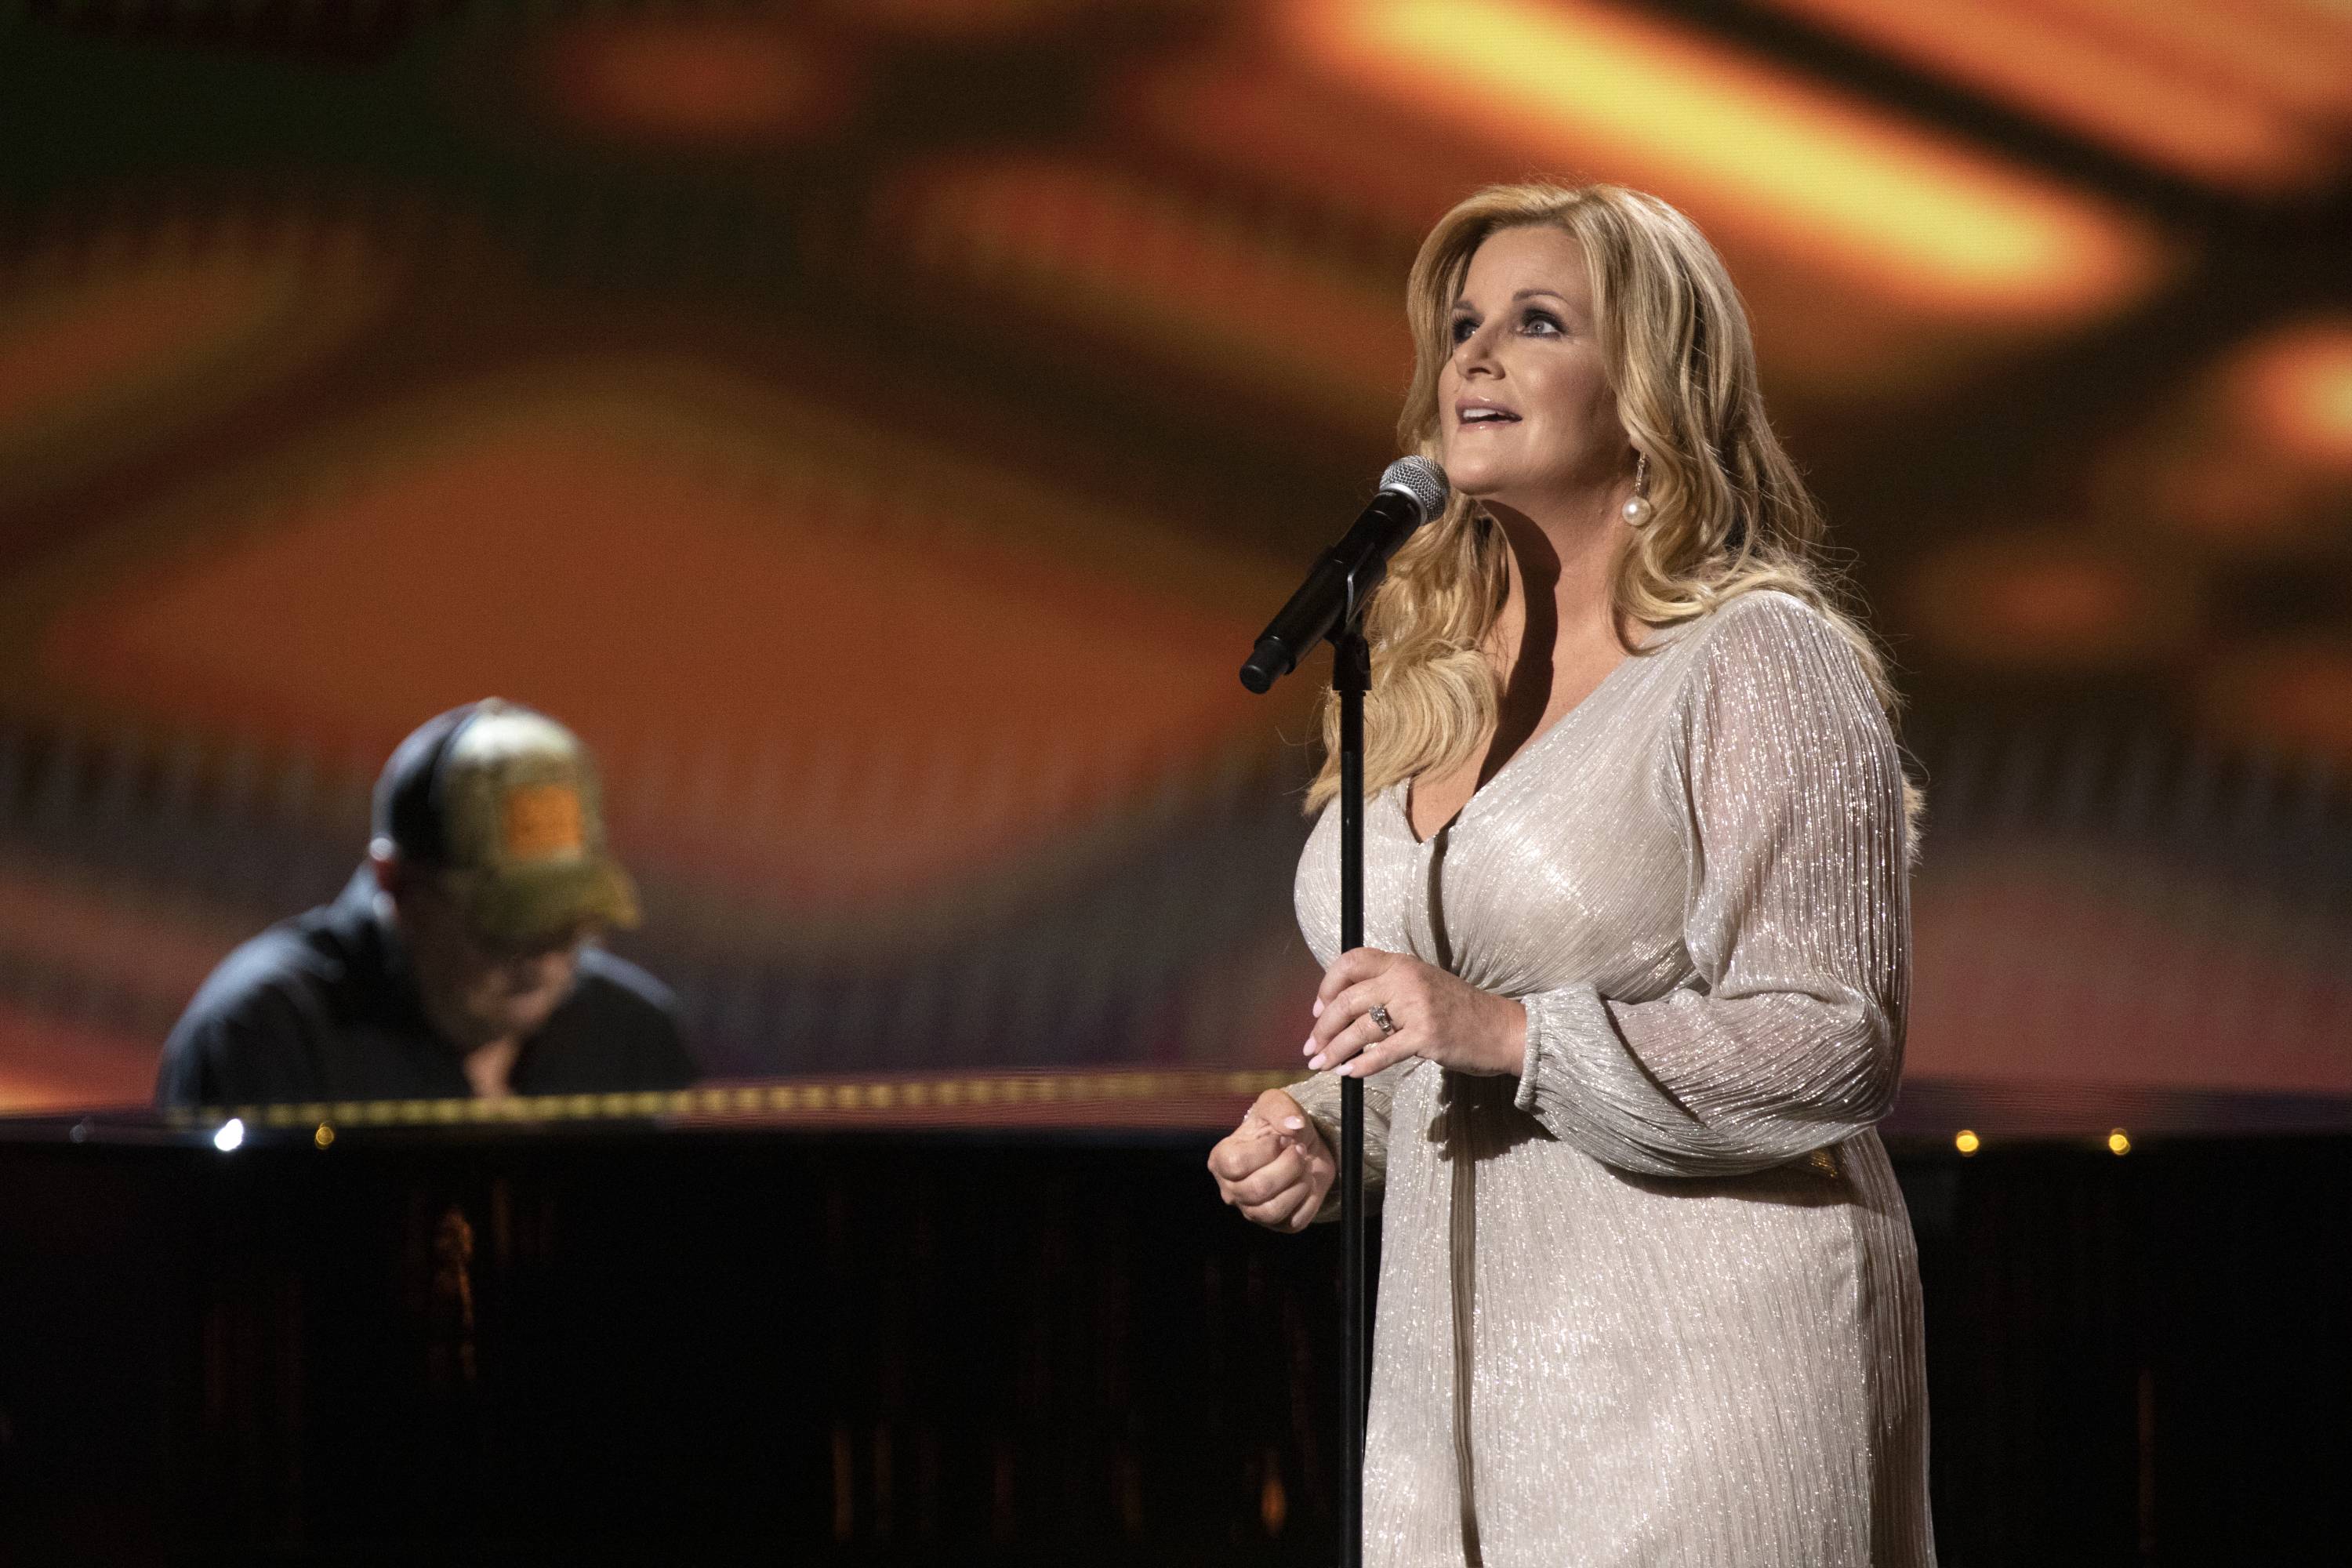 NASHVILLE - JULY 24: Trisha Yearwood performs for the 55TH ACADEMY OF COUNTRY MUSIC AWARDS. Hosted by Keith Urban, the 55TH ACM AWARDS will be broadcast Wednesday, Sept. 16 (live 8:00-11:00 PM ET/delayed PT) on the CBS Television Network, and available to stream live and on demand on CBS All Access.